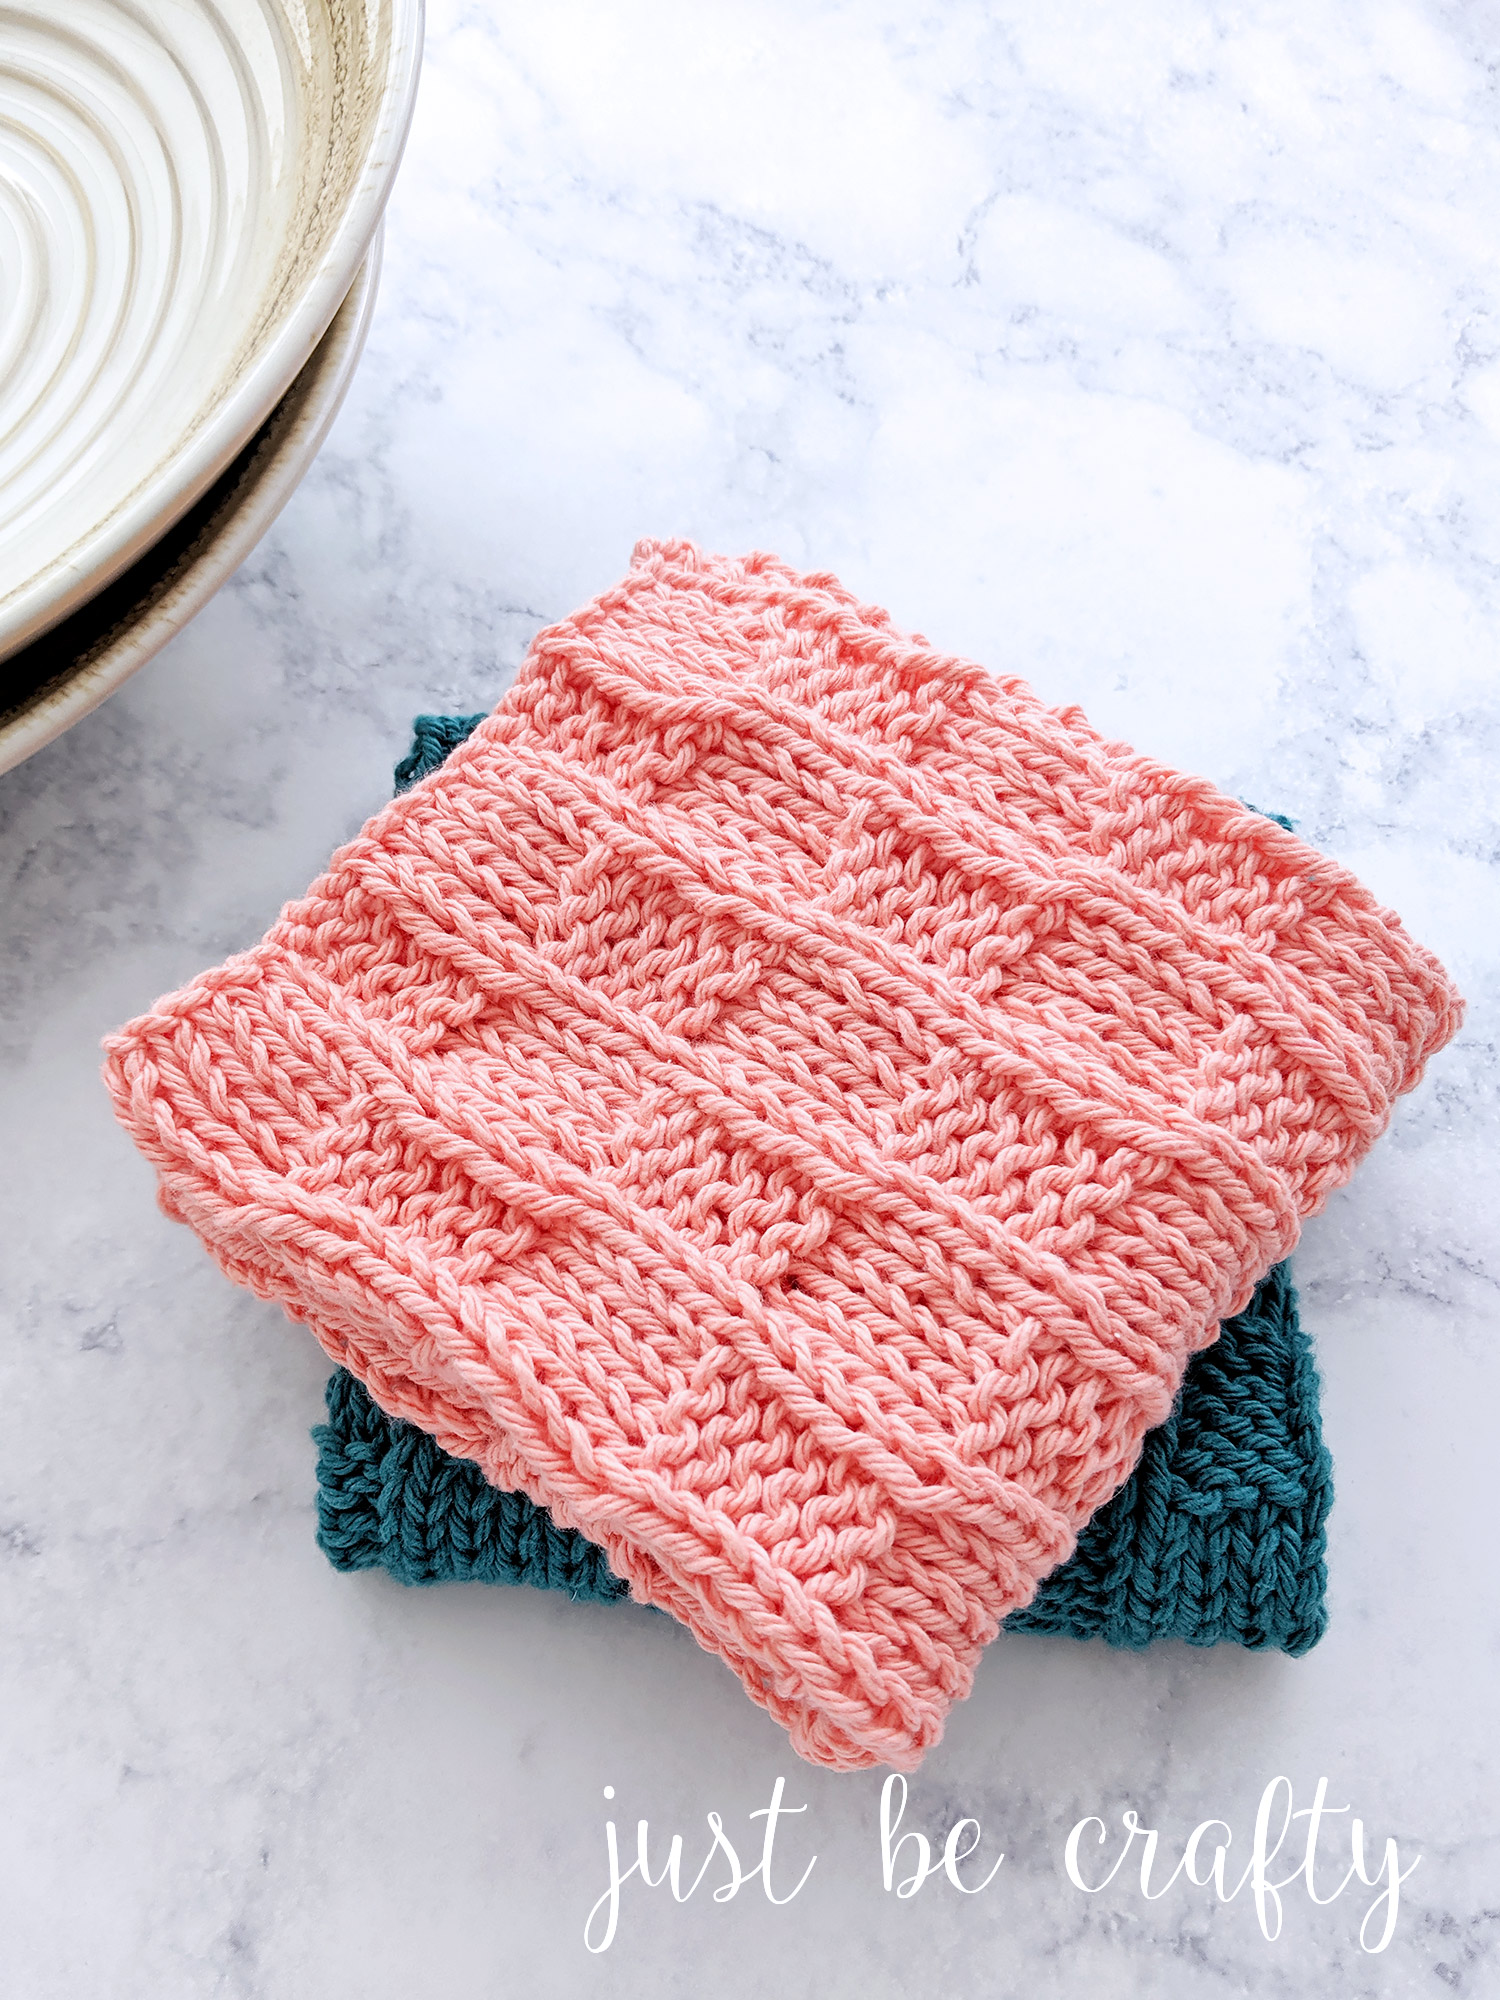 Checkered Waves Knitted Dishcloth Pattern